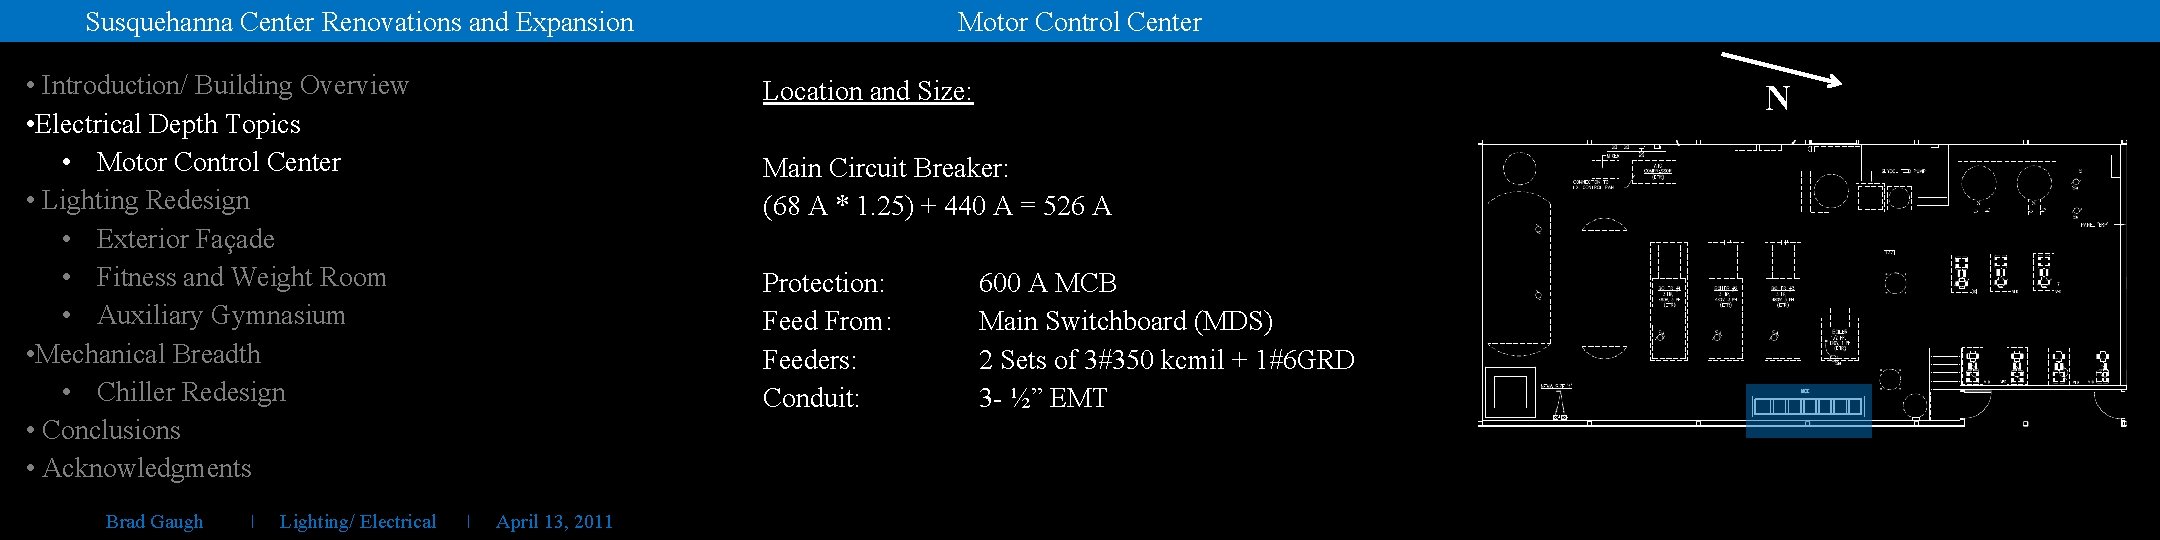 Motor Control Center Susquehanna Center Renovations and Expansion • Introduction/ Building Overview • Electrical